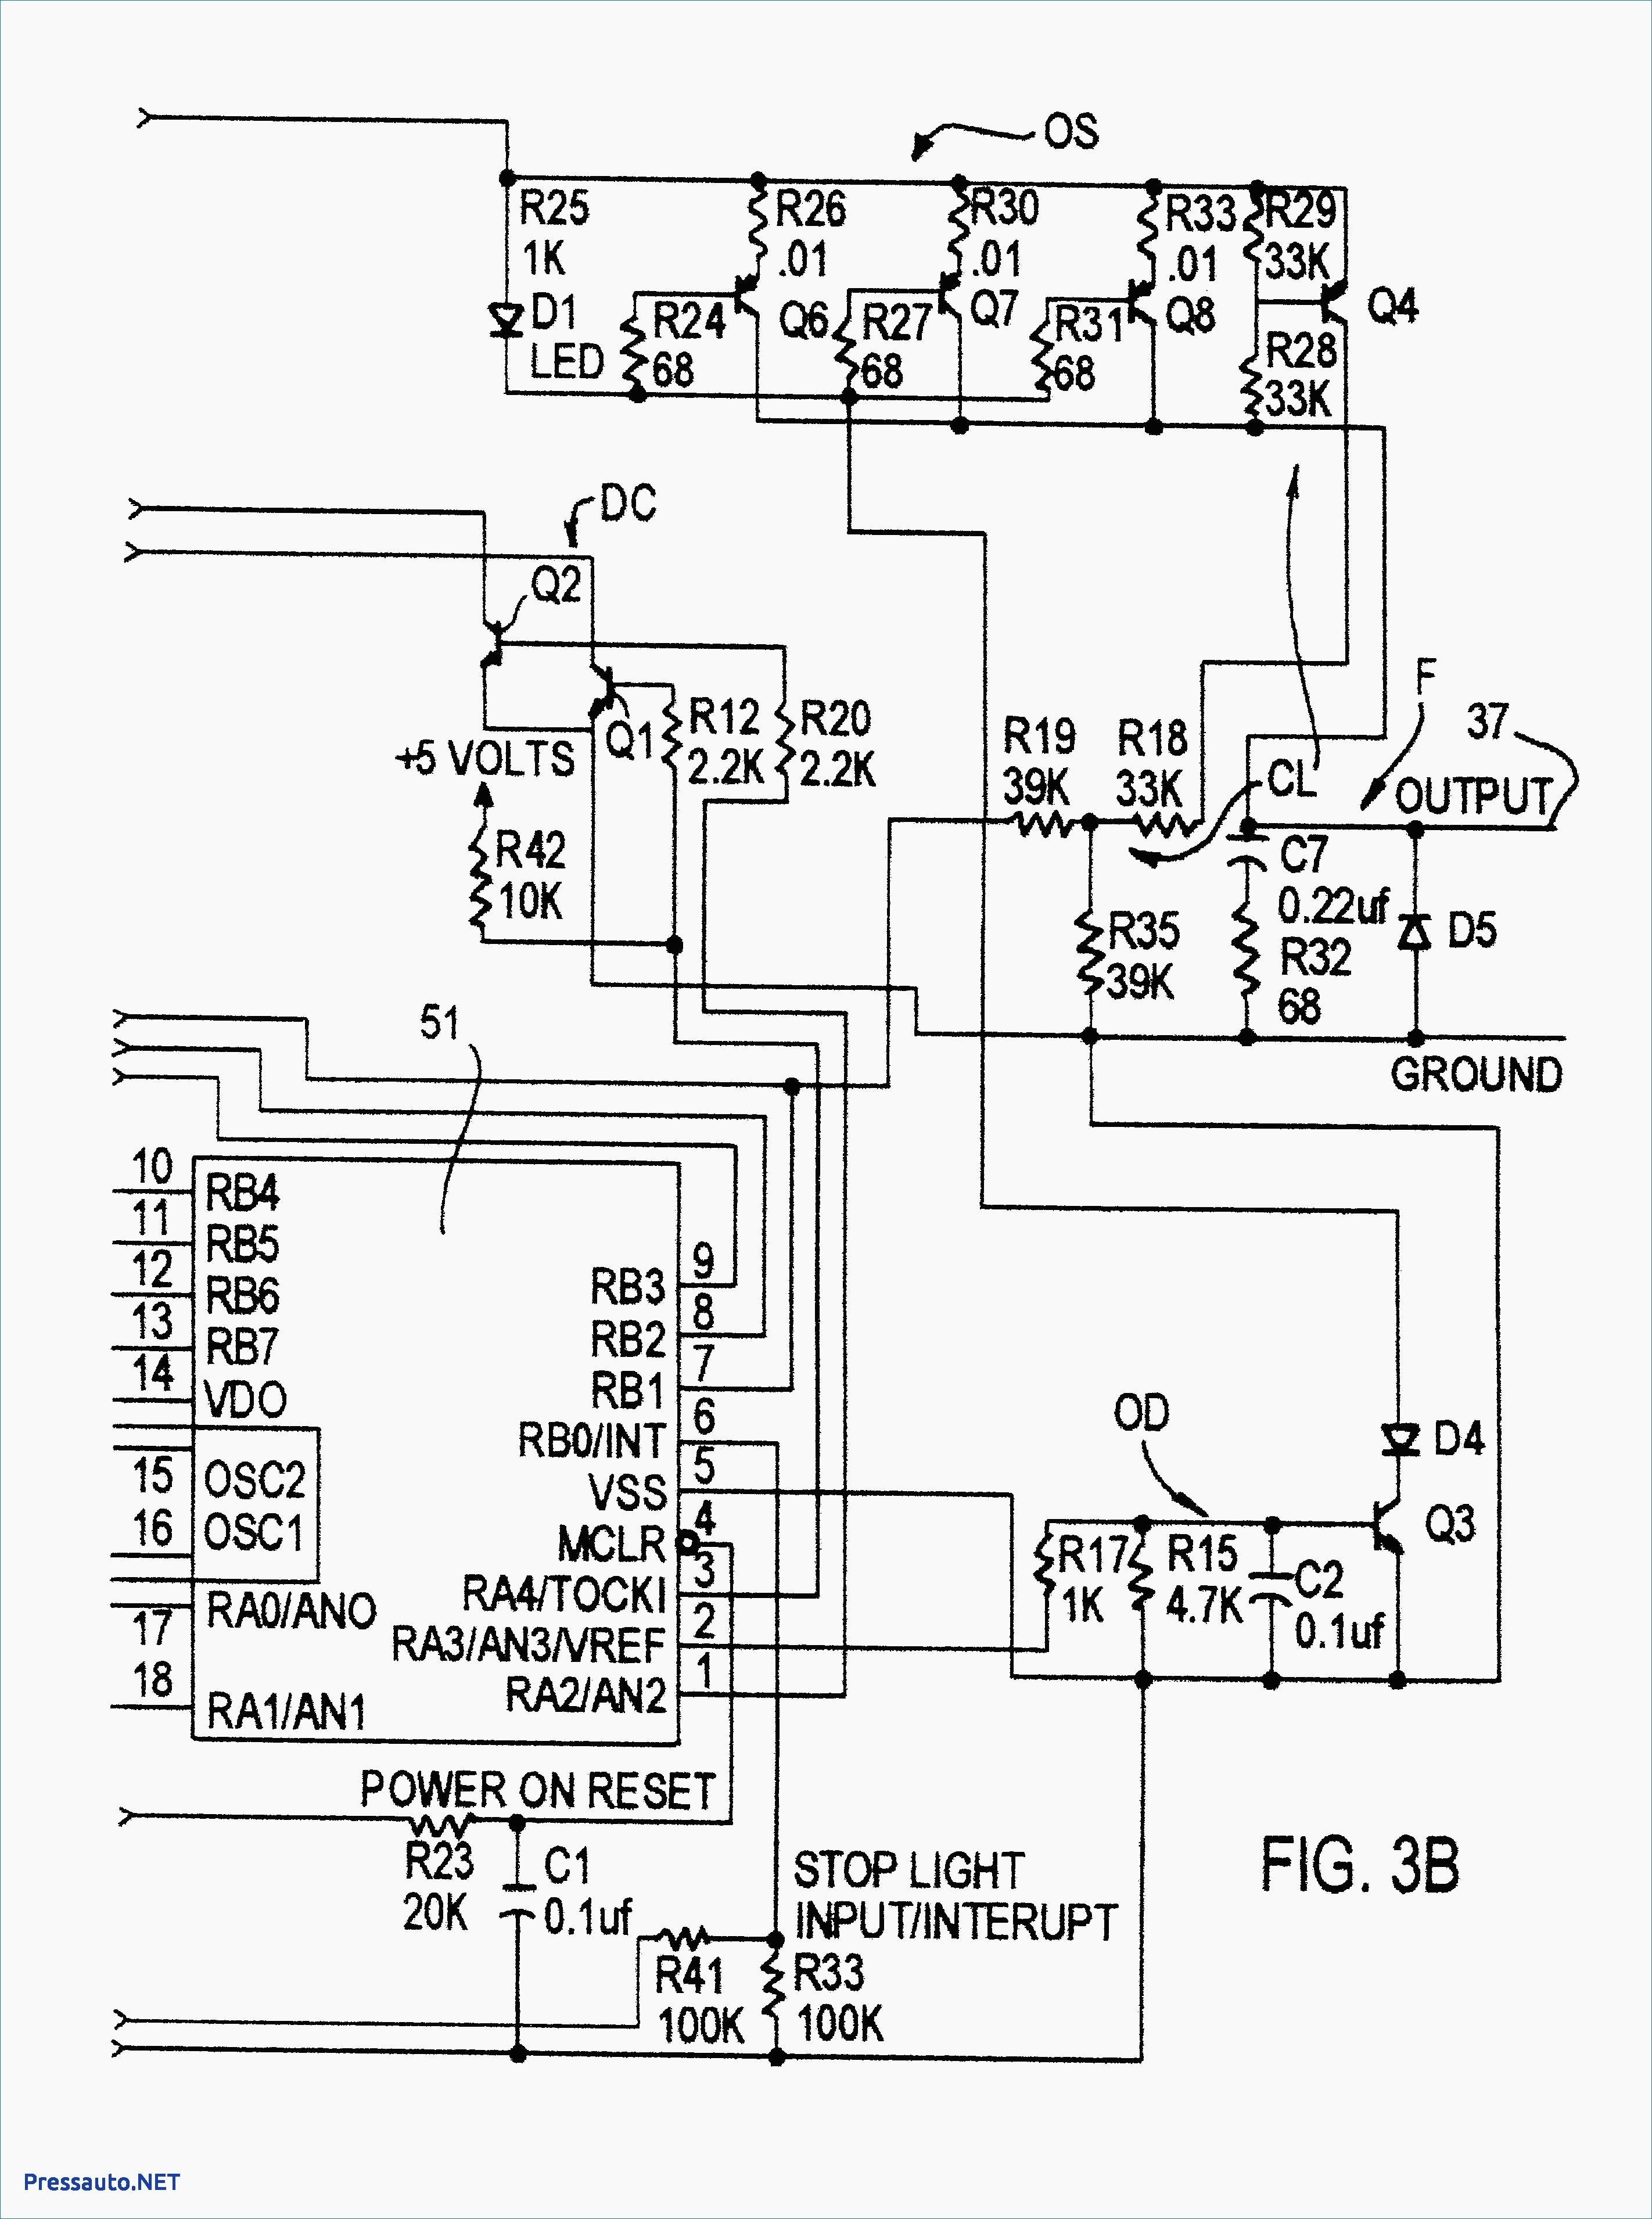 220 120 Volt Wiring Diagrams Auto Instructions